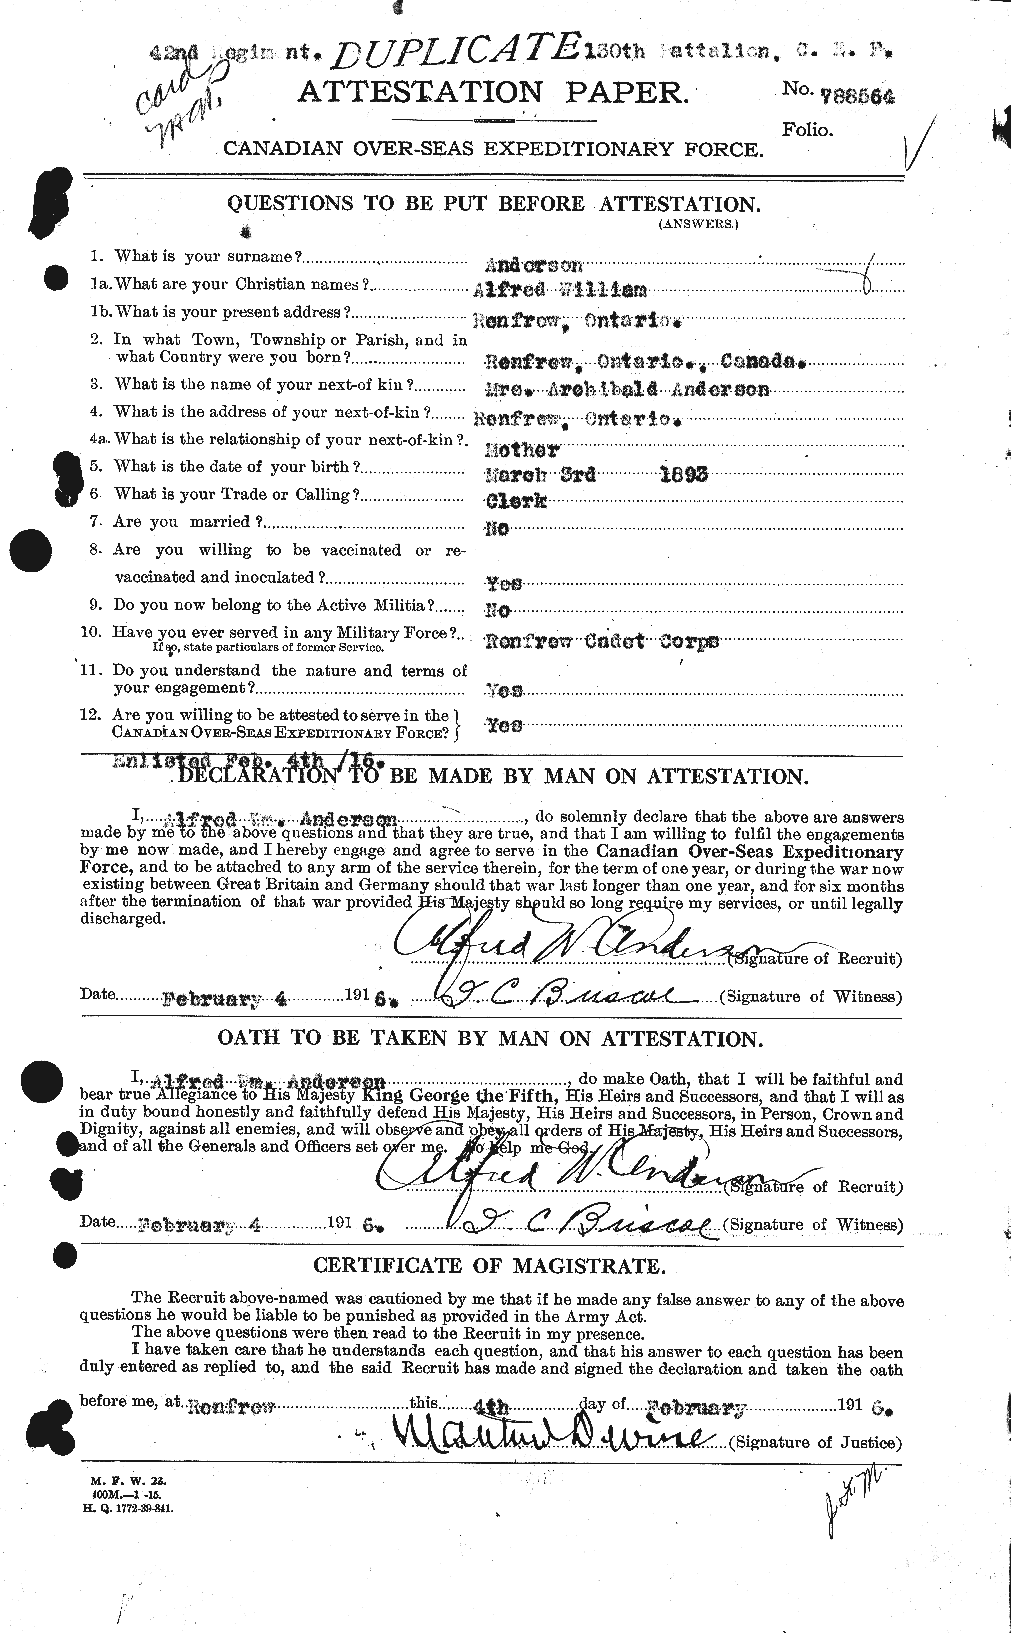 Personnel Records of the First World War - CEF 209450a